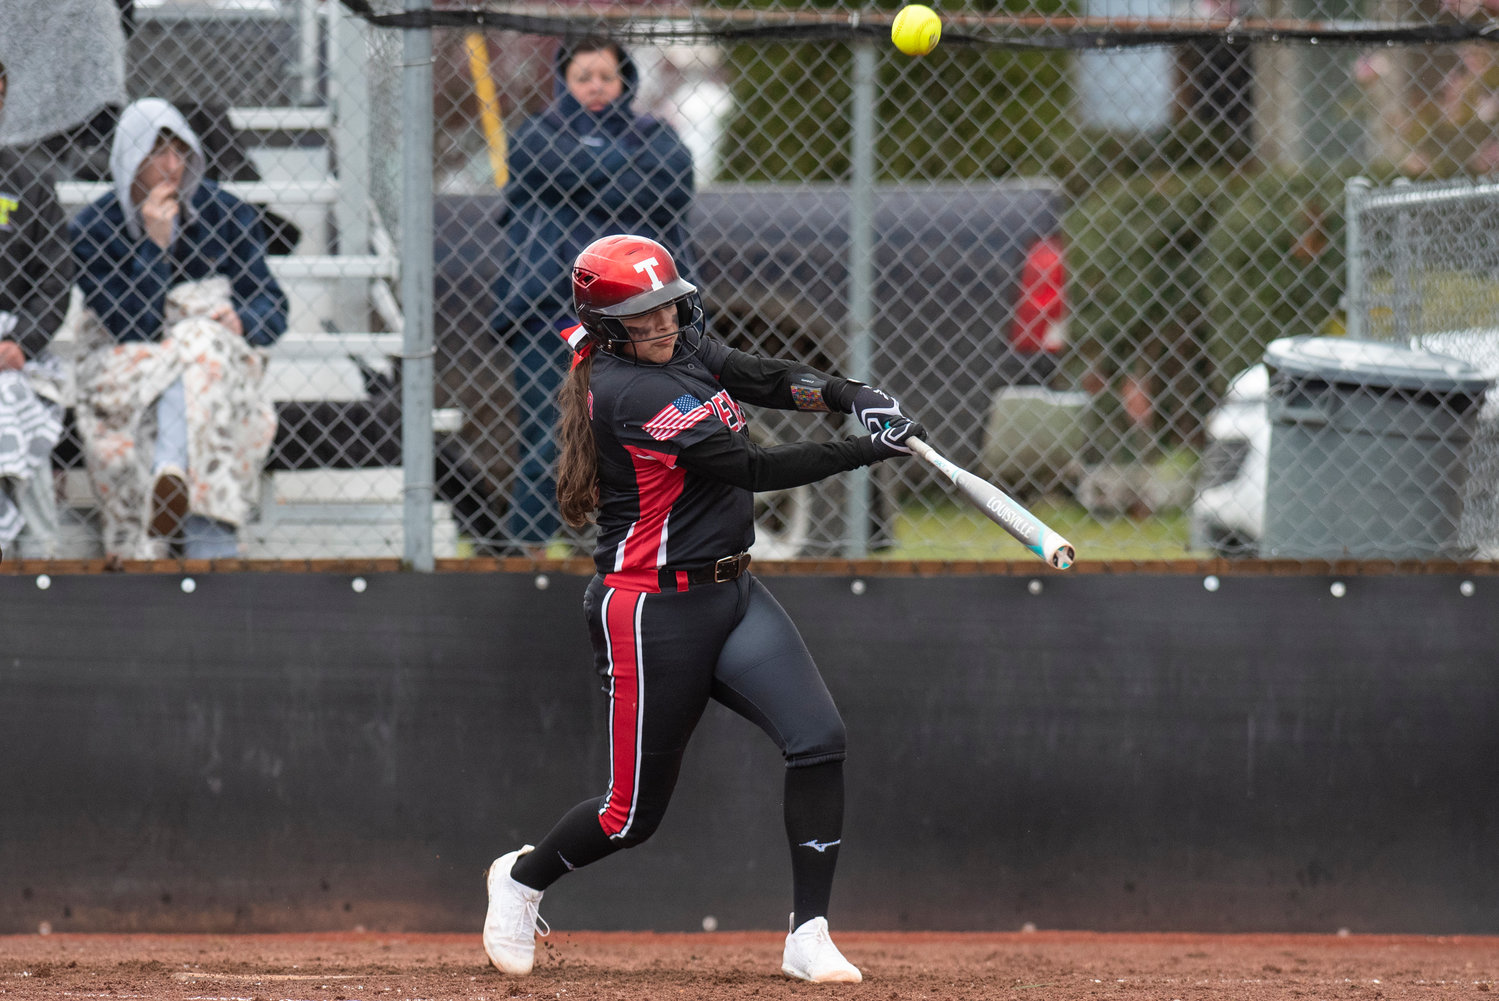 Tenino's Kiyah Goodwin connects on an Elma pitch during a home game on April 26.